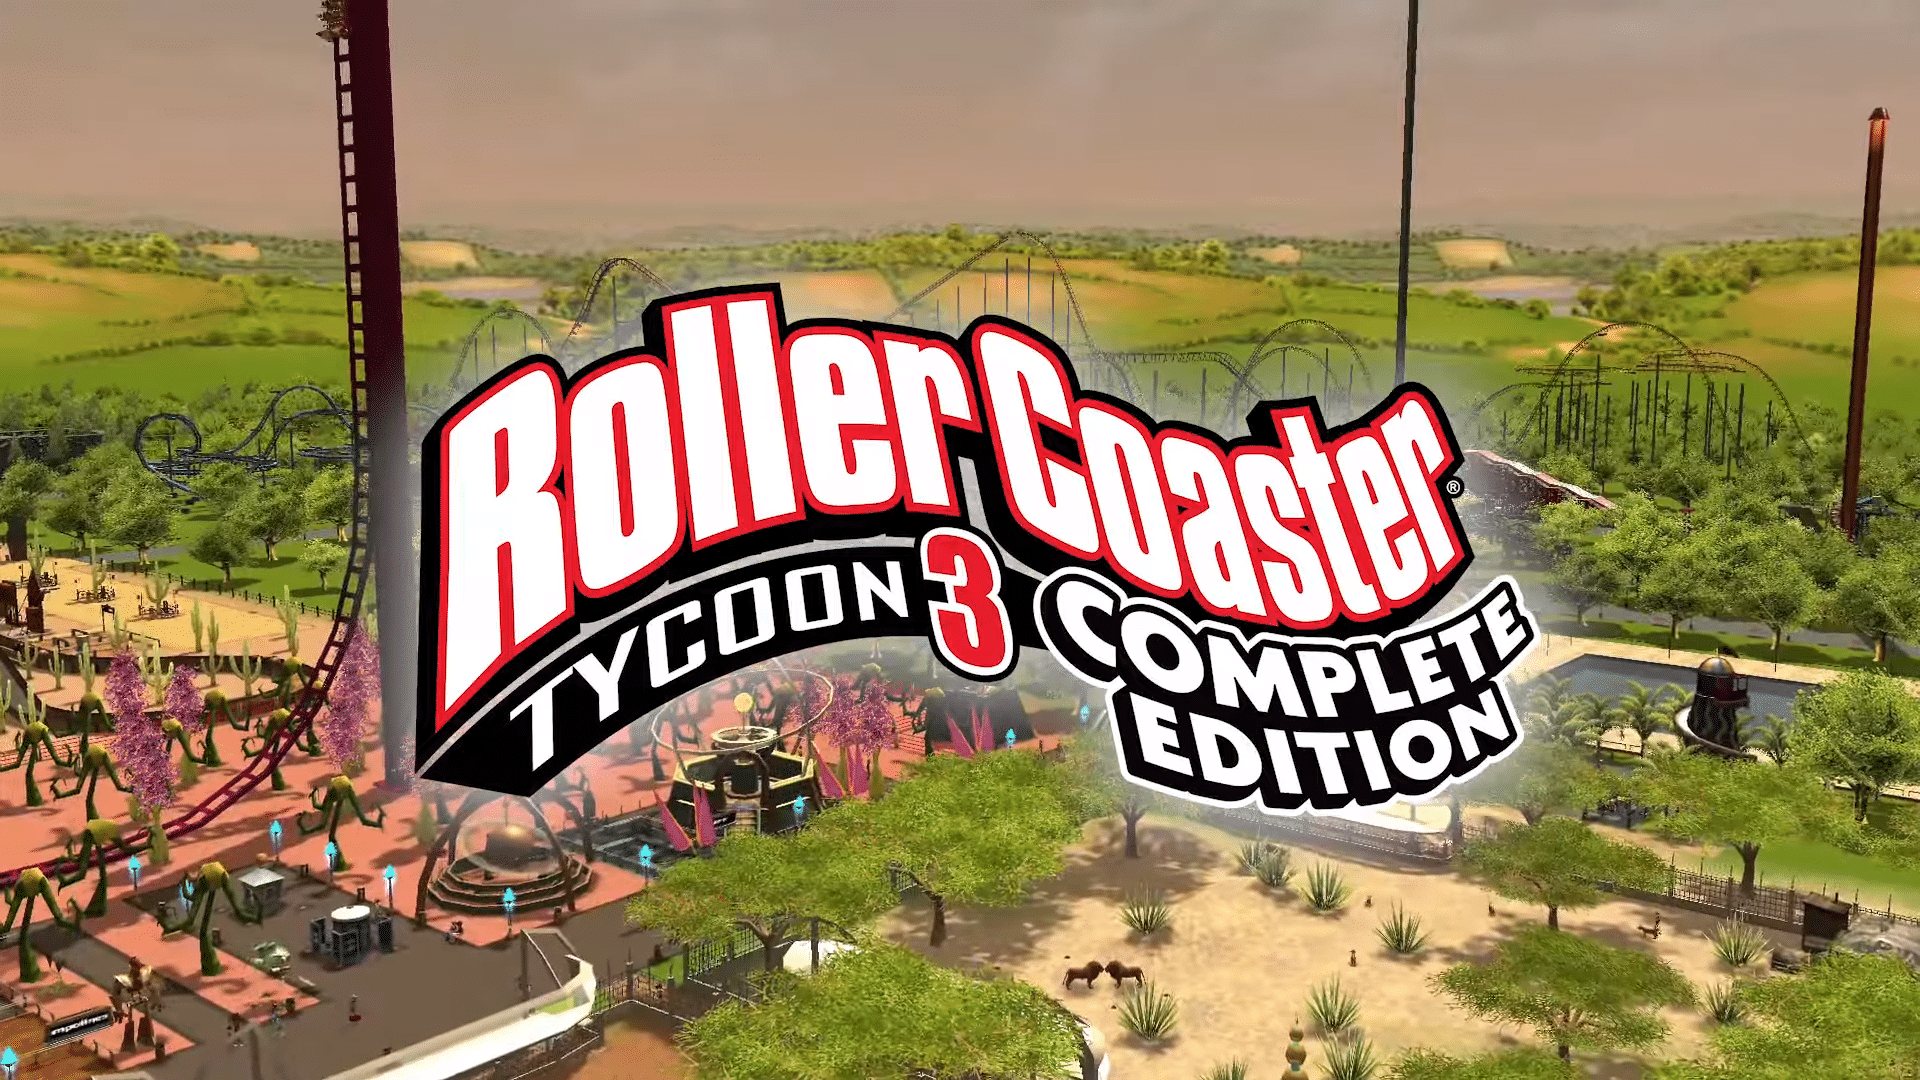 RollerCoaster Tycoon 3: Complete Edition Announced For PC and Switch